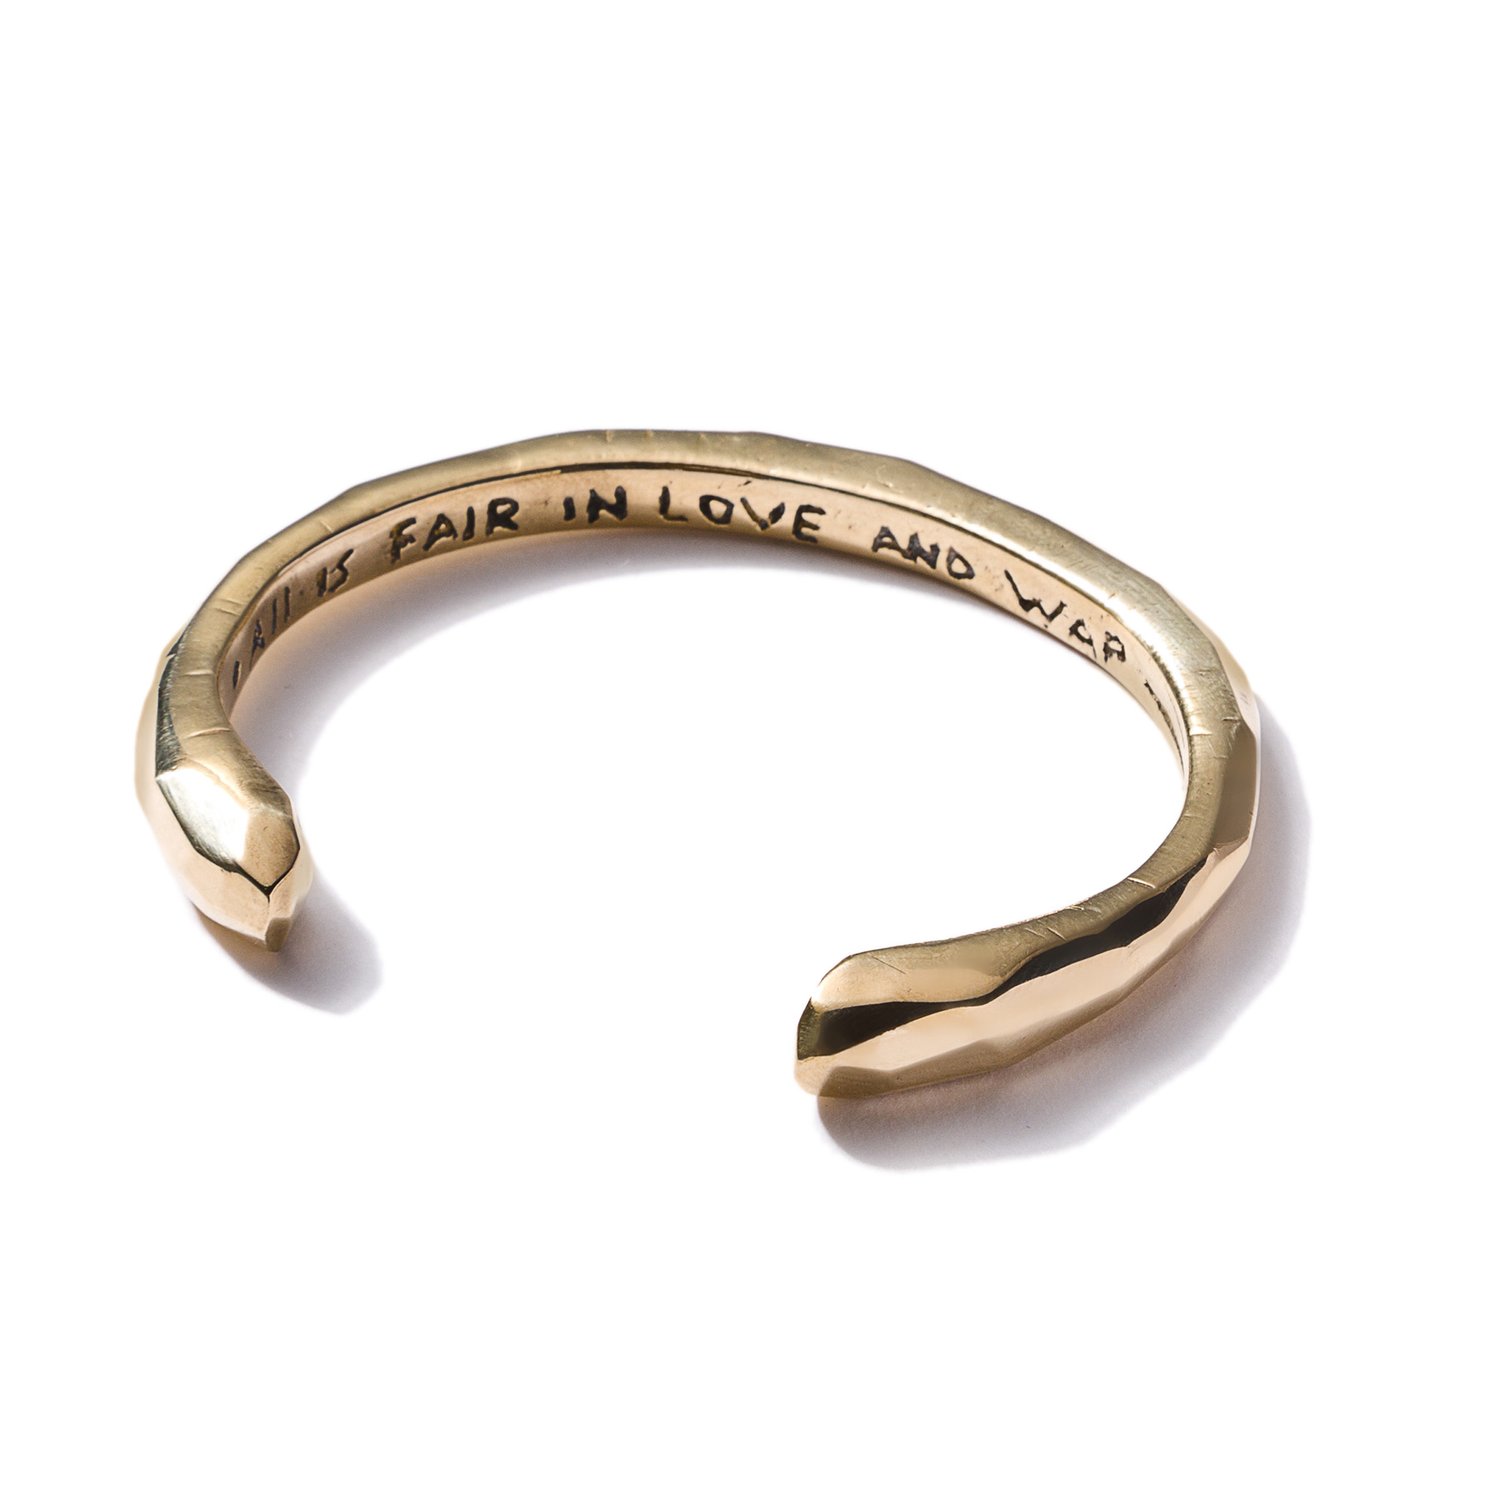 Image of All is Fair in Love and War Bracelet